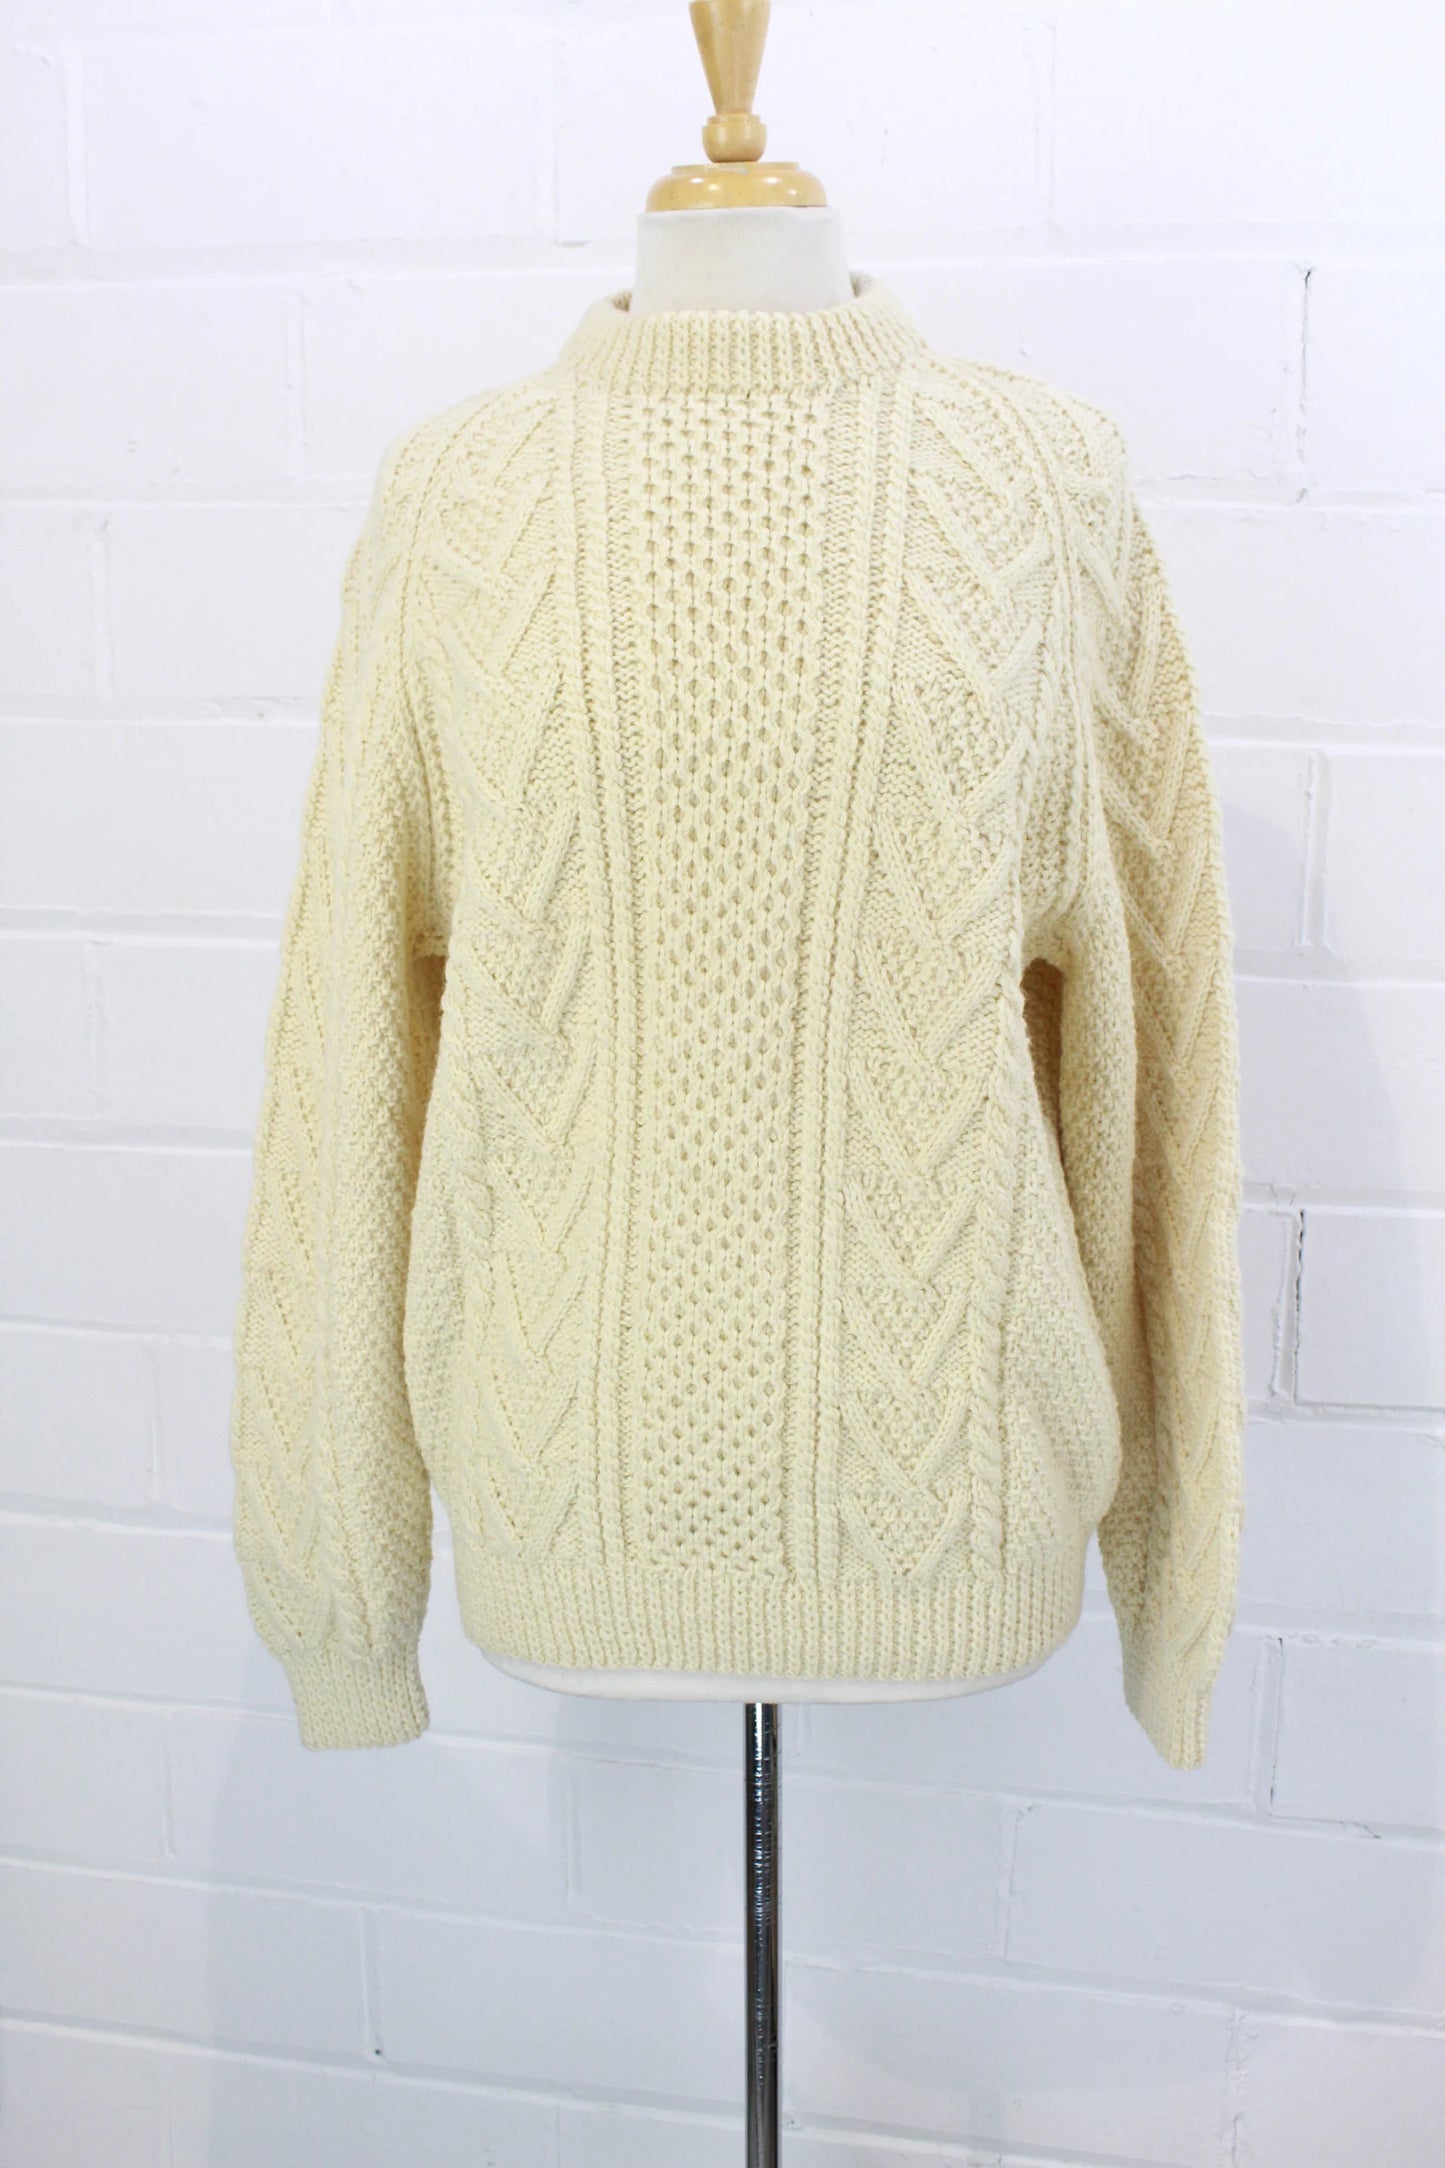 Vintage Cream Wool Aran Carbery Fisherman Sweater and Matching Knit Tam/Beret with Pom Pom, Hand Knit in Ireland